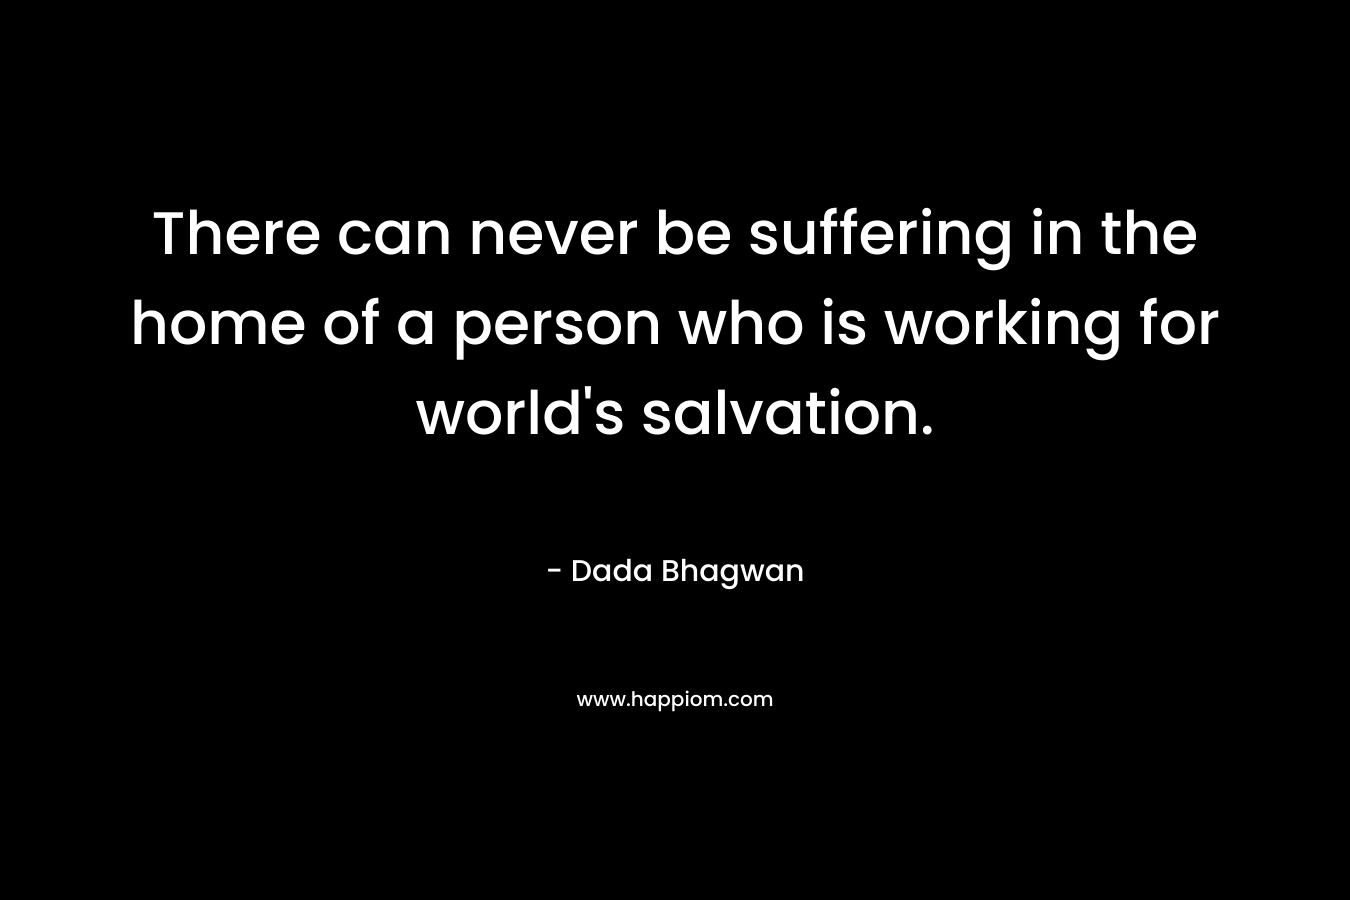 There can never be suffering in the home of a person who is working for world's salvation.